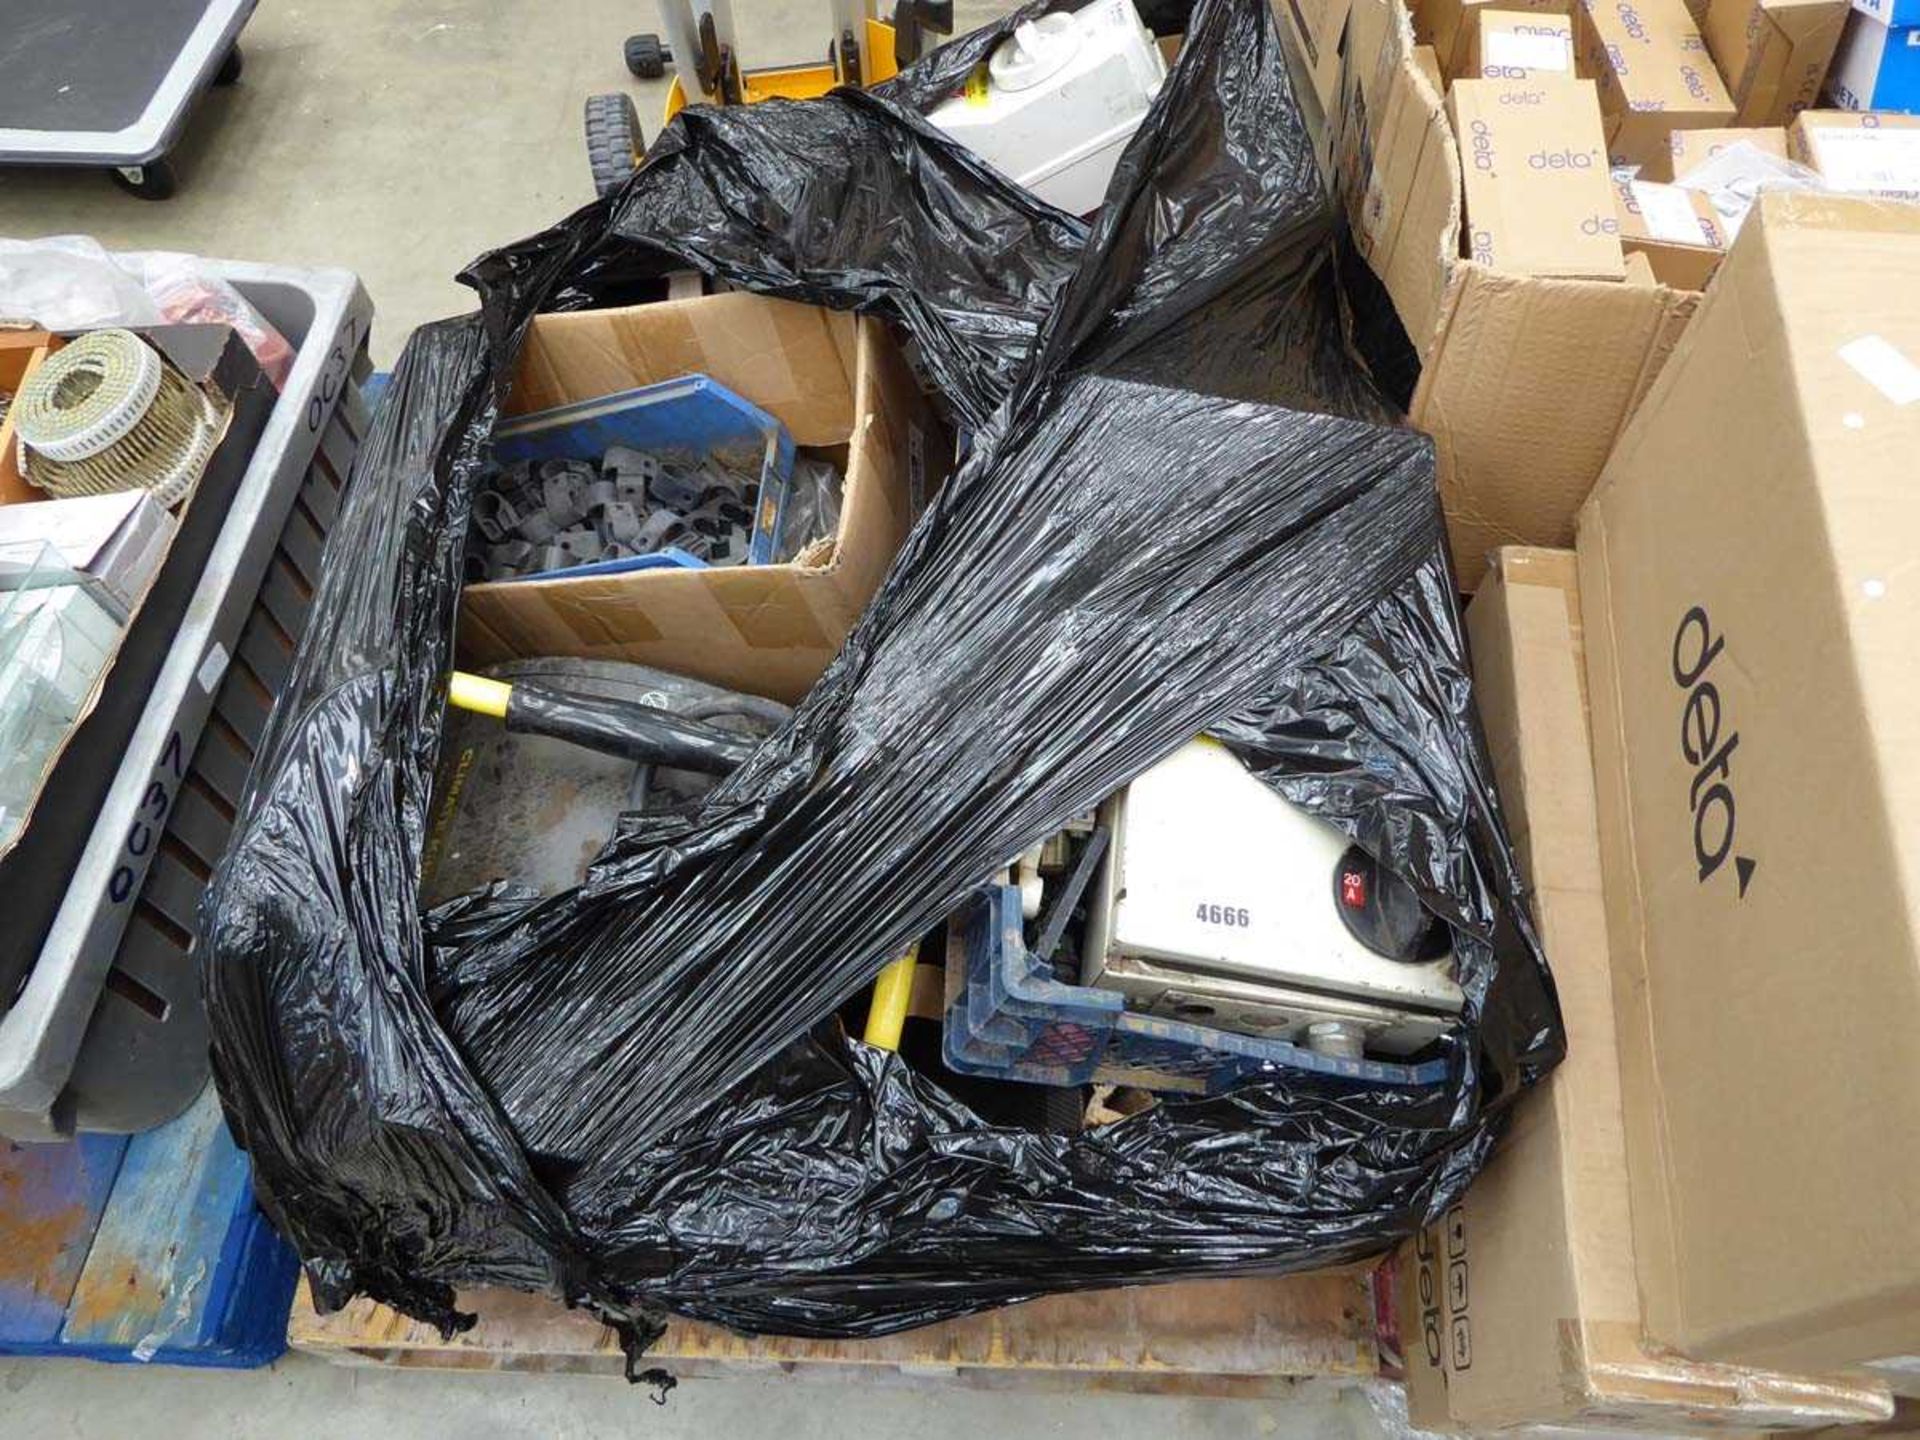 Pallet containing heater, used switches and sockets etc.